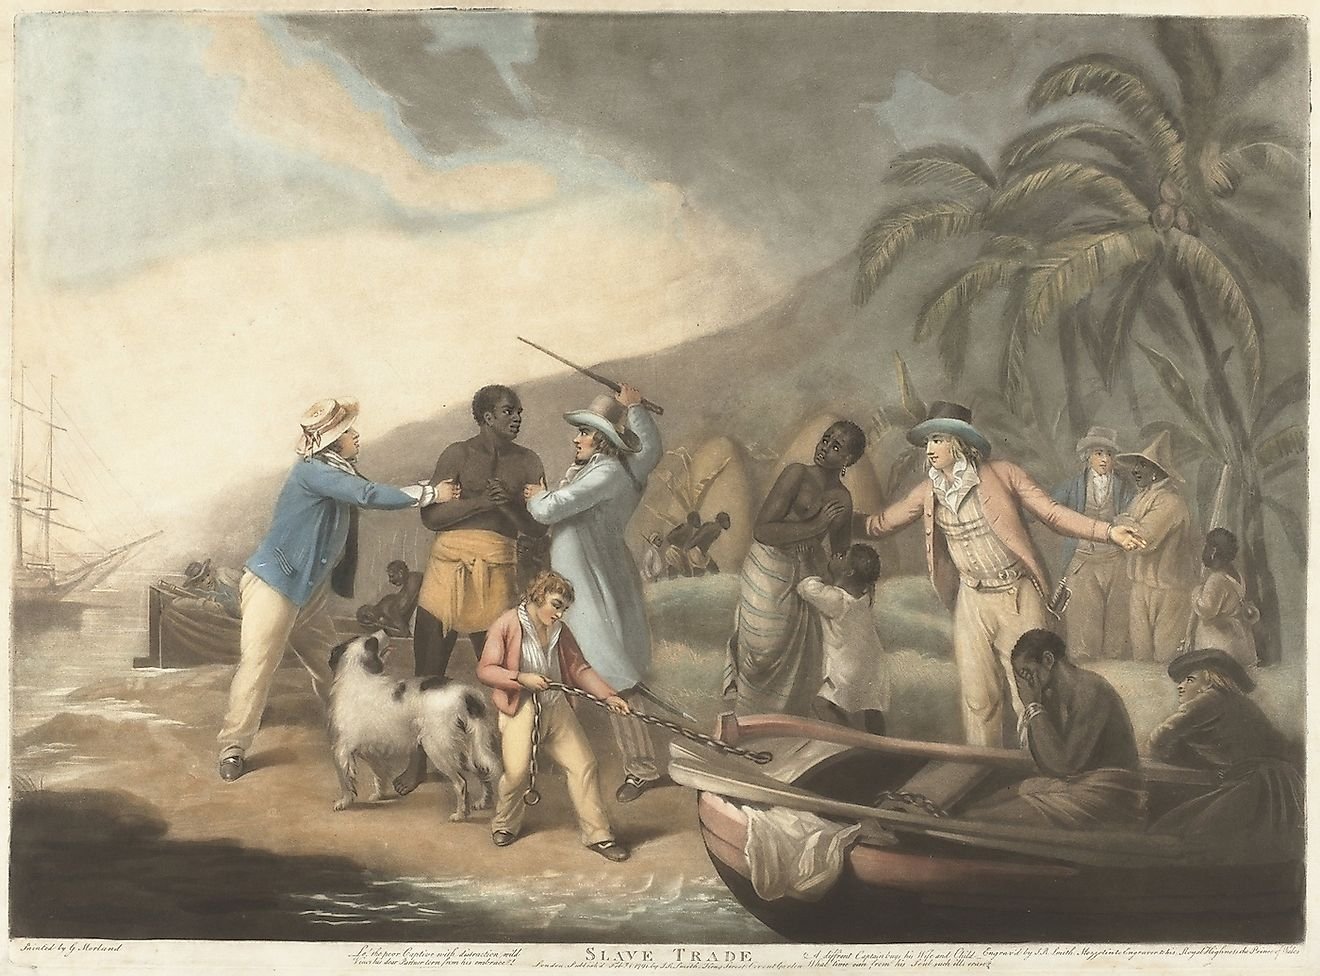 10 Misconceptions About American Slavery That Most People Don't Know